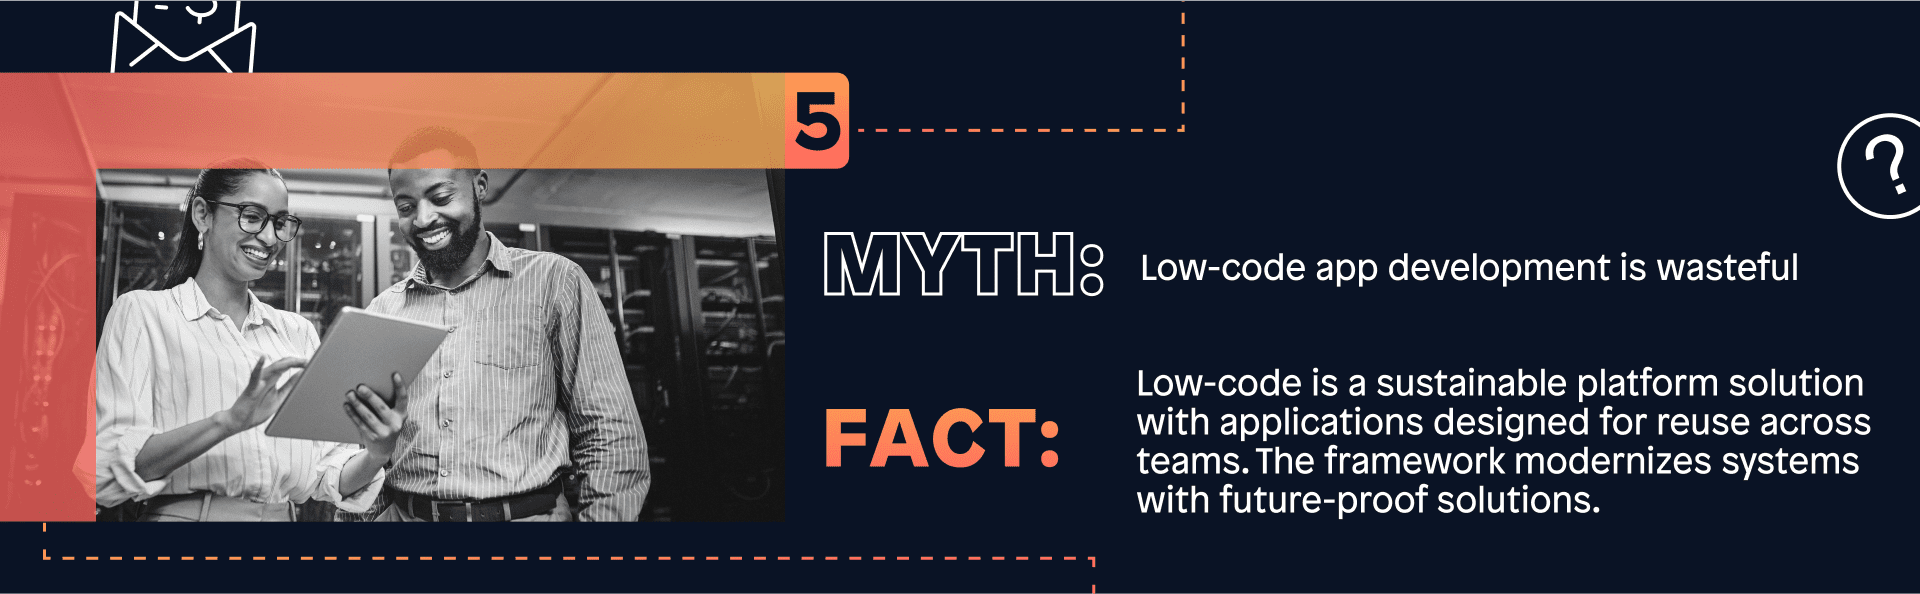 Myth: Low-code app development is wasteful ; Fact: Low-code is a sustainable platform solution with applications designed for reuse across teams. The framework modernizes systems with future-proof solutions. 